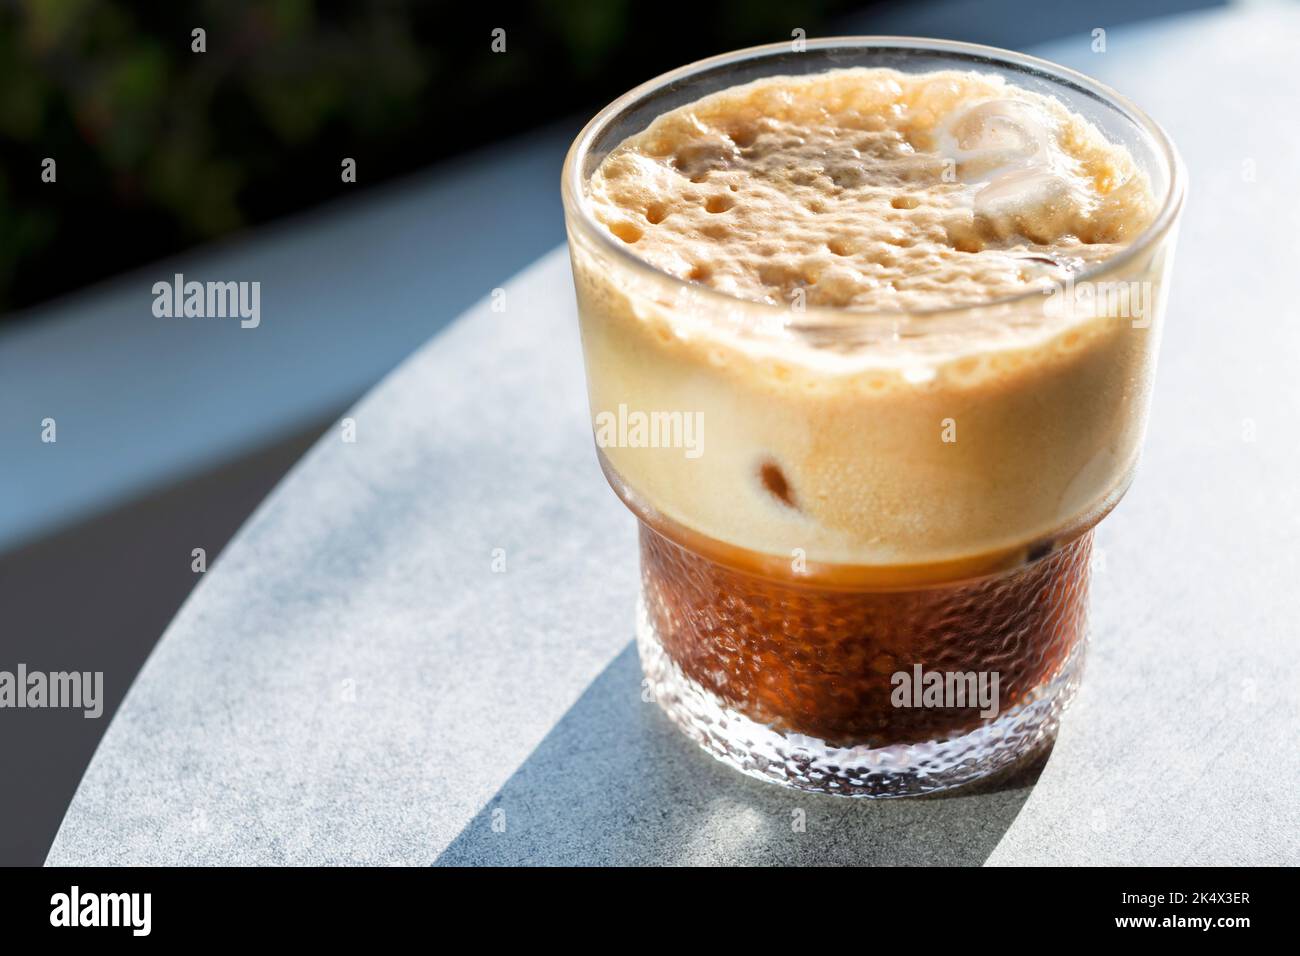 A freshly brewed iced coffee drink or beverage served to a table outside a cafe. The drink has a thick crema, a cooling drink on a hot day Stock Photo